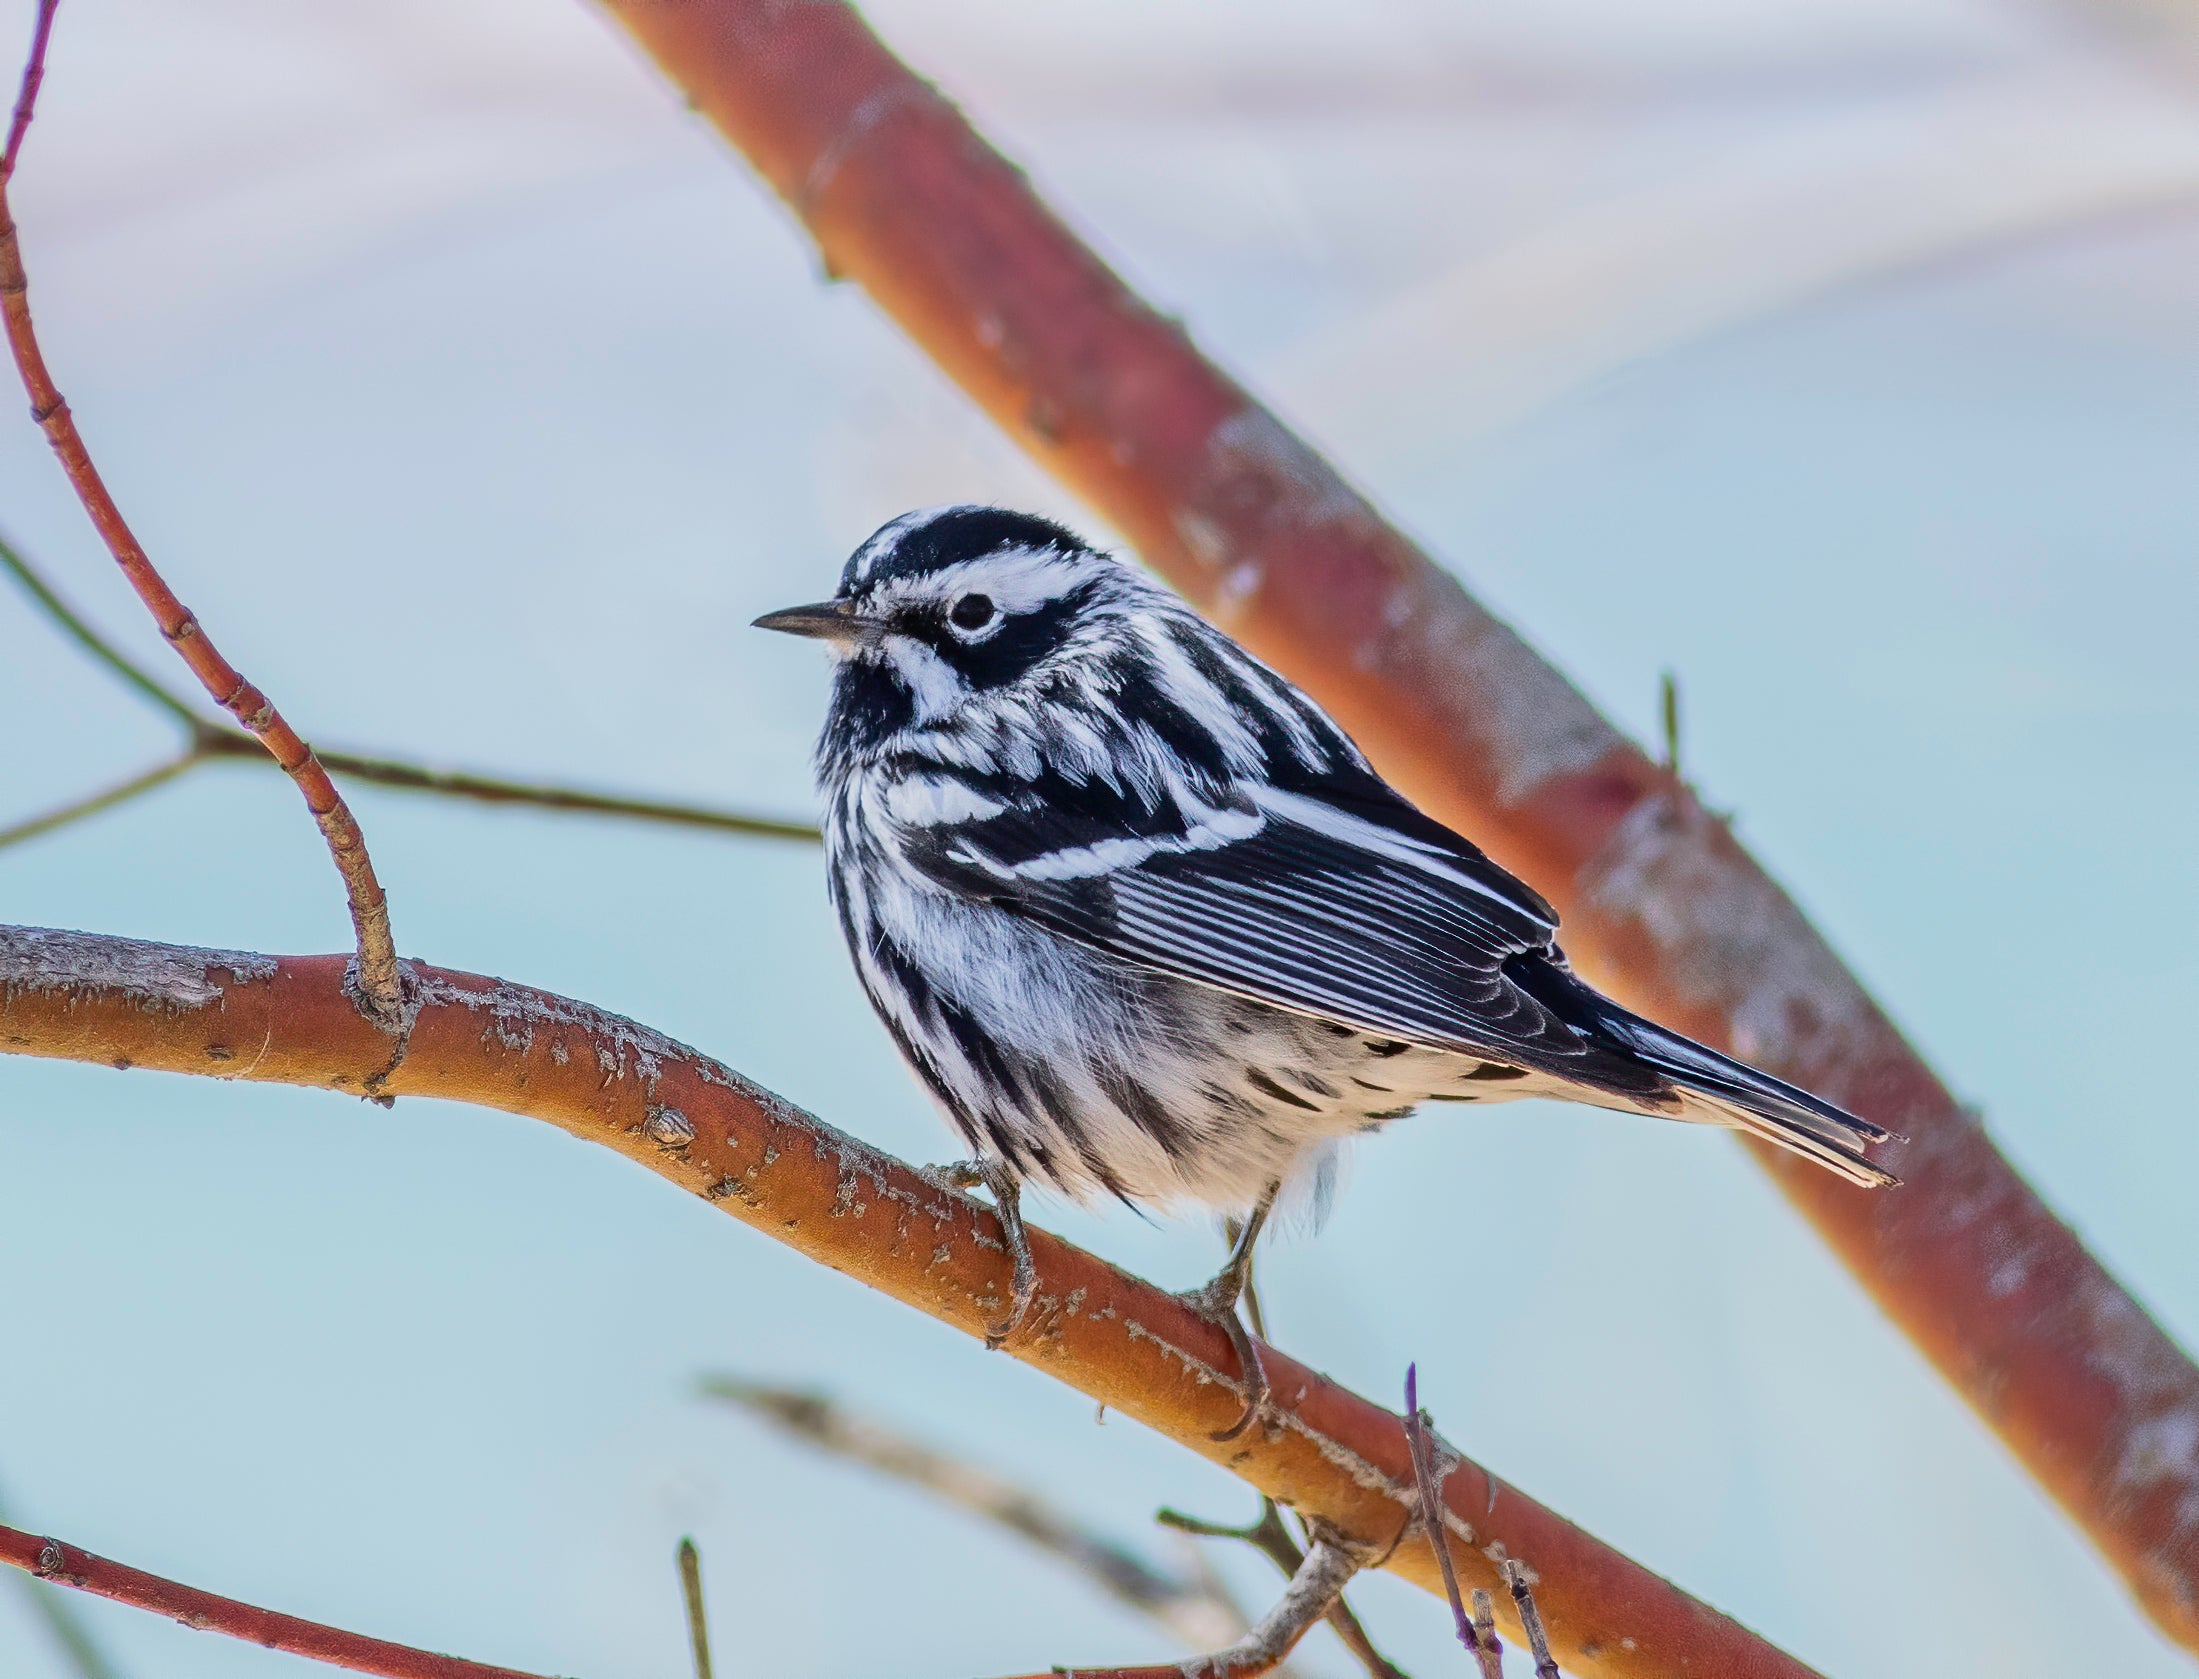 A black-and-white warbler, one species of bird that has been rescued from outside a building on Manhattan’s Upper West Side